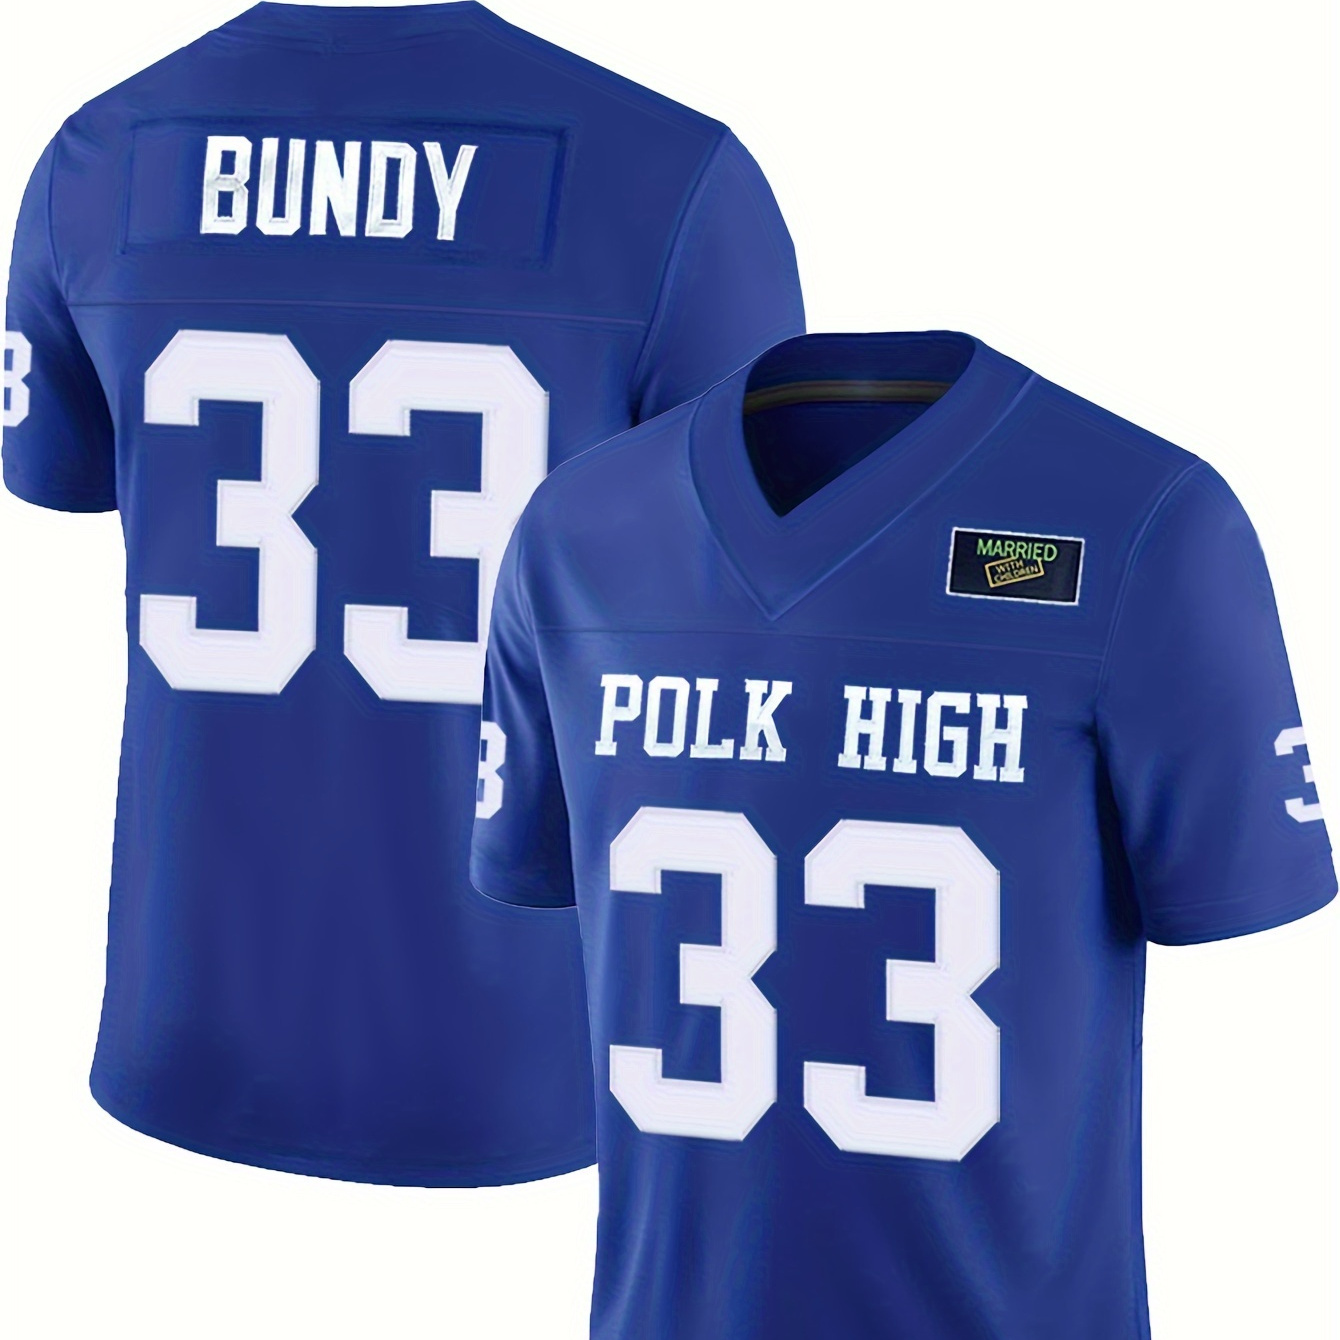 

Polk High 33 Print Men's Sports Jersey, Breathable Football Shirt With V-neck, Short Sleeve Athletic Training & Game Top, Football Uniform, Sporty Style